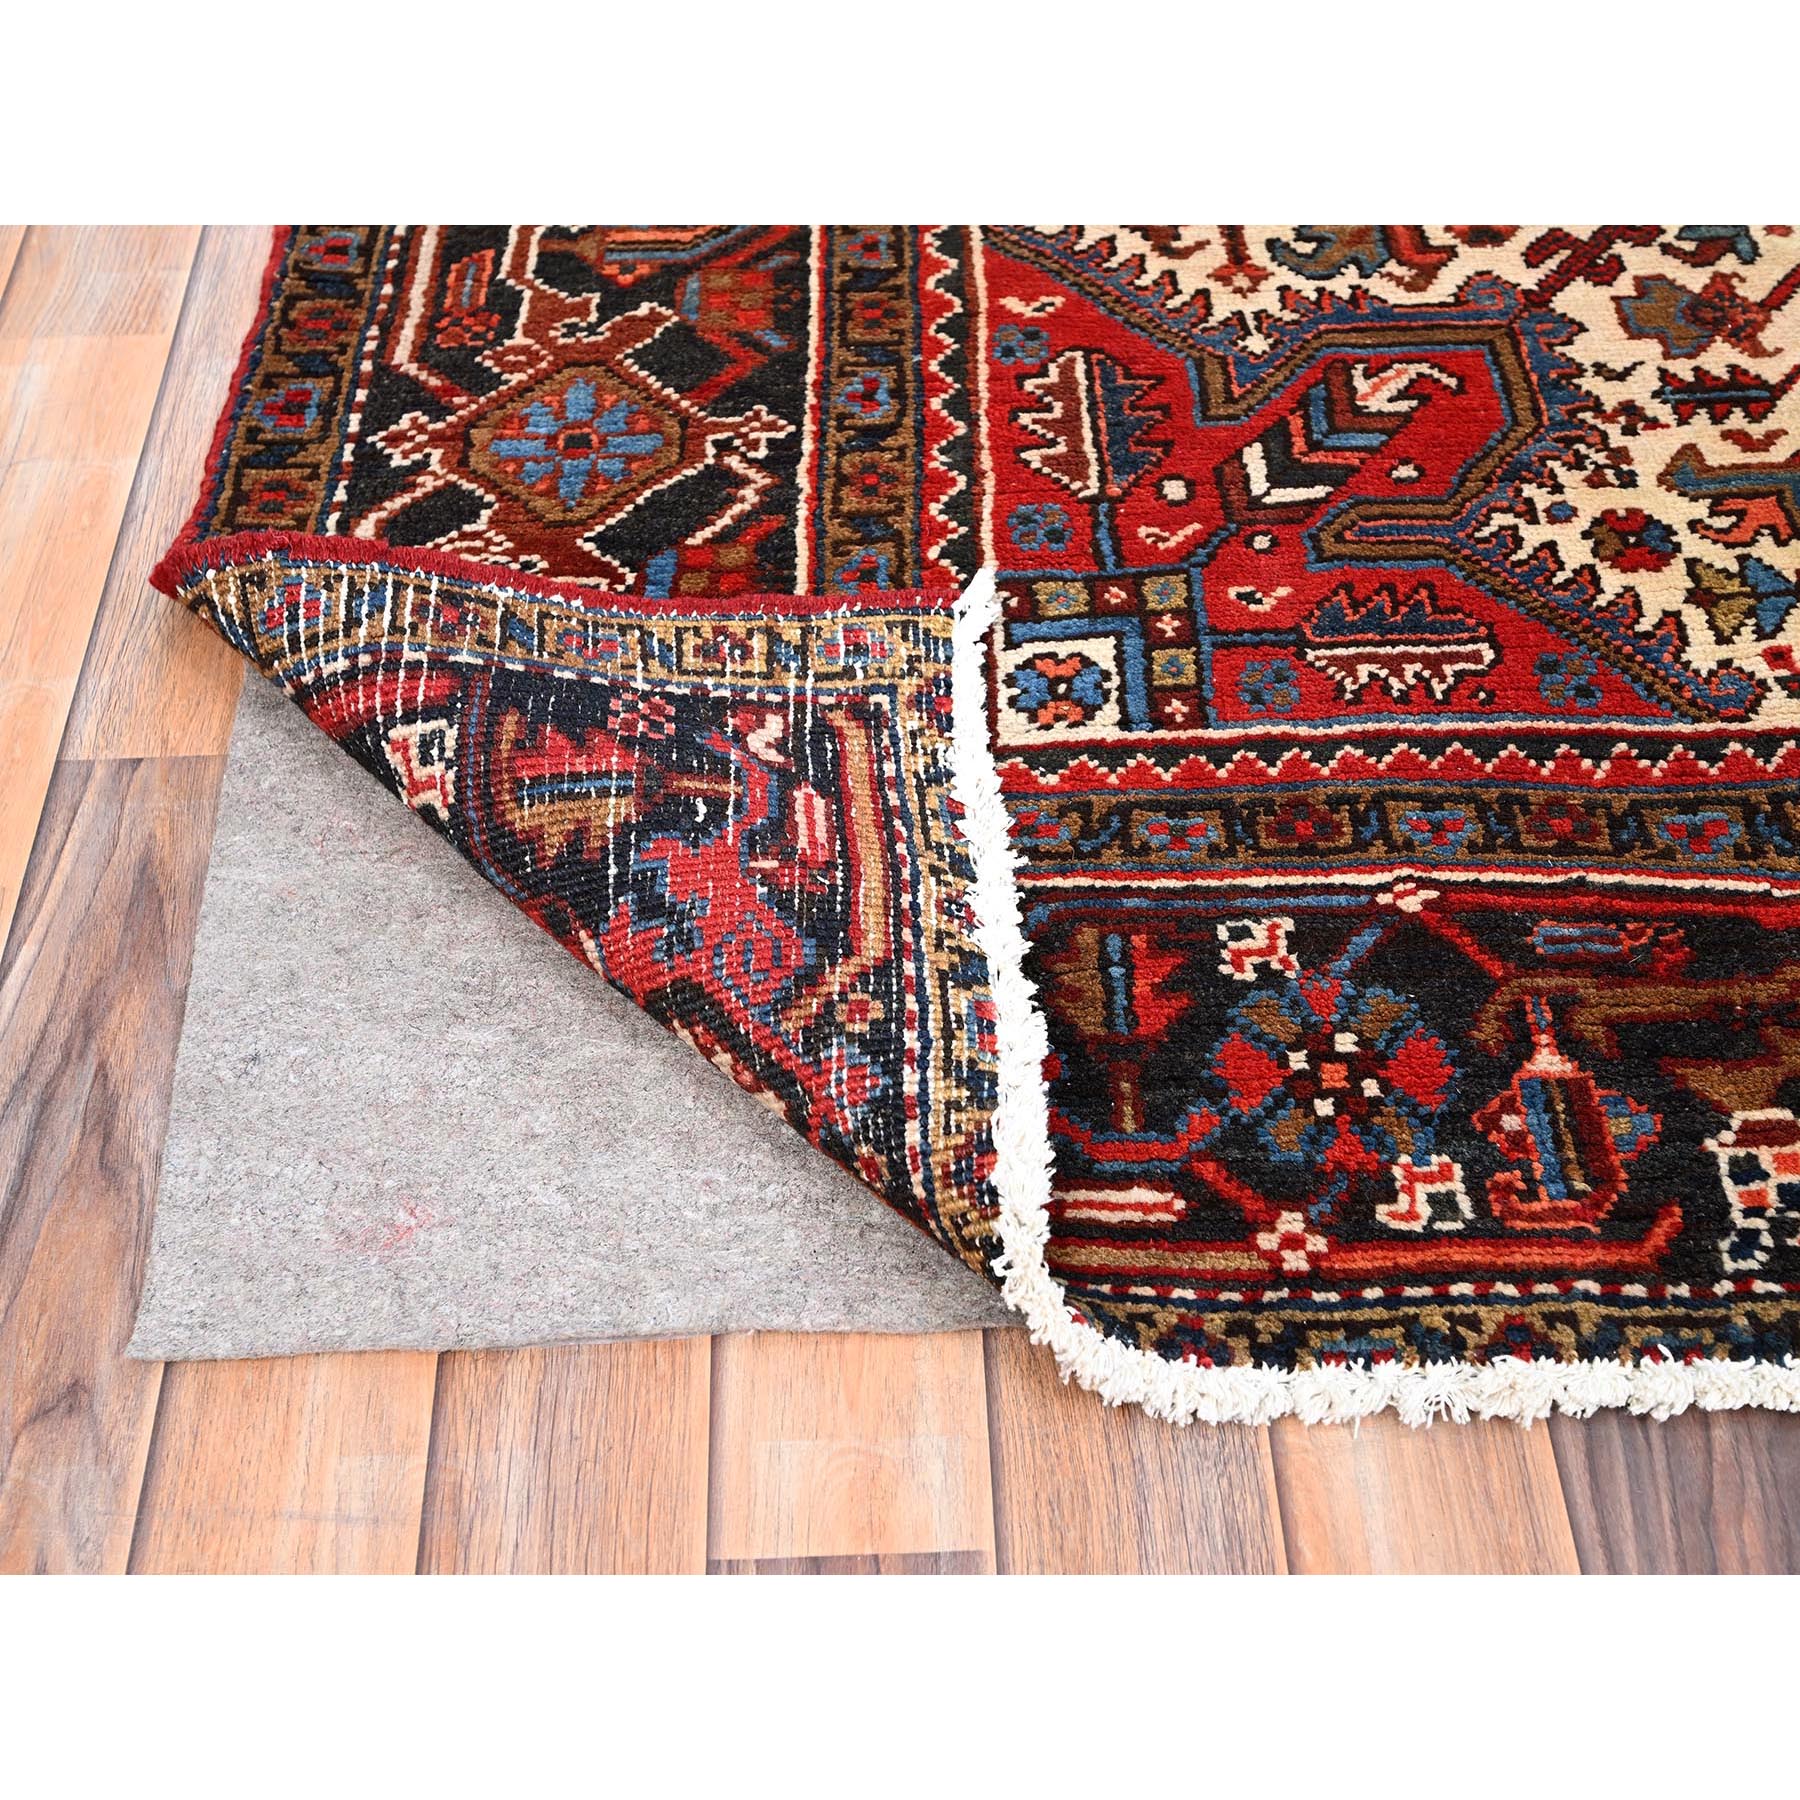 7'8"x11' Imperial Red, Semi Antique Persian Heriz, Good Condition, Distressed Look, Pure Wool, Hand Woven, Oriental Rug 